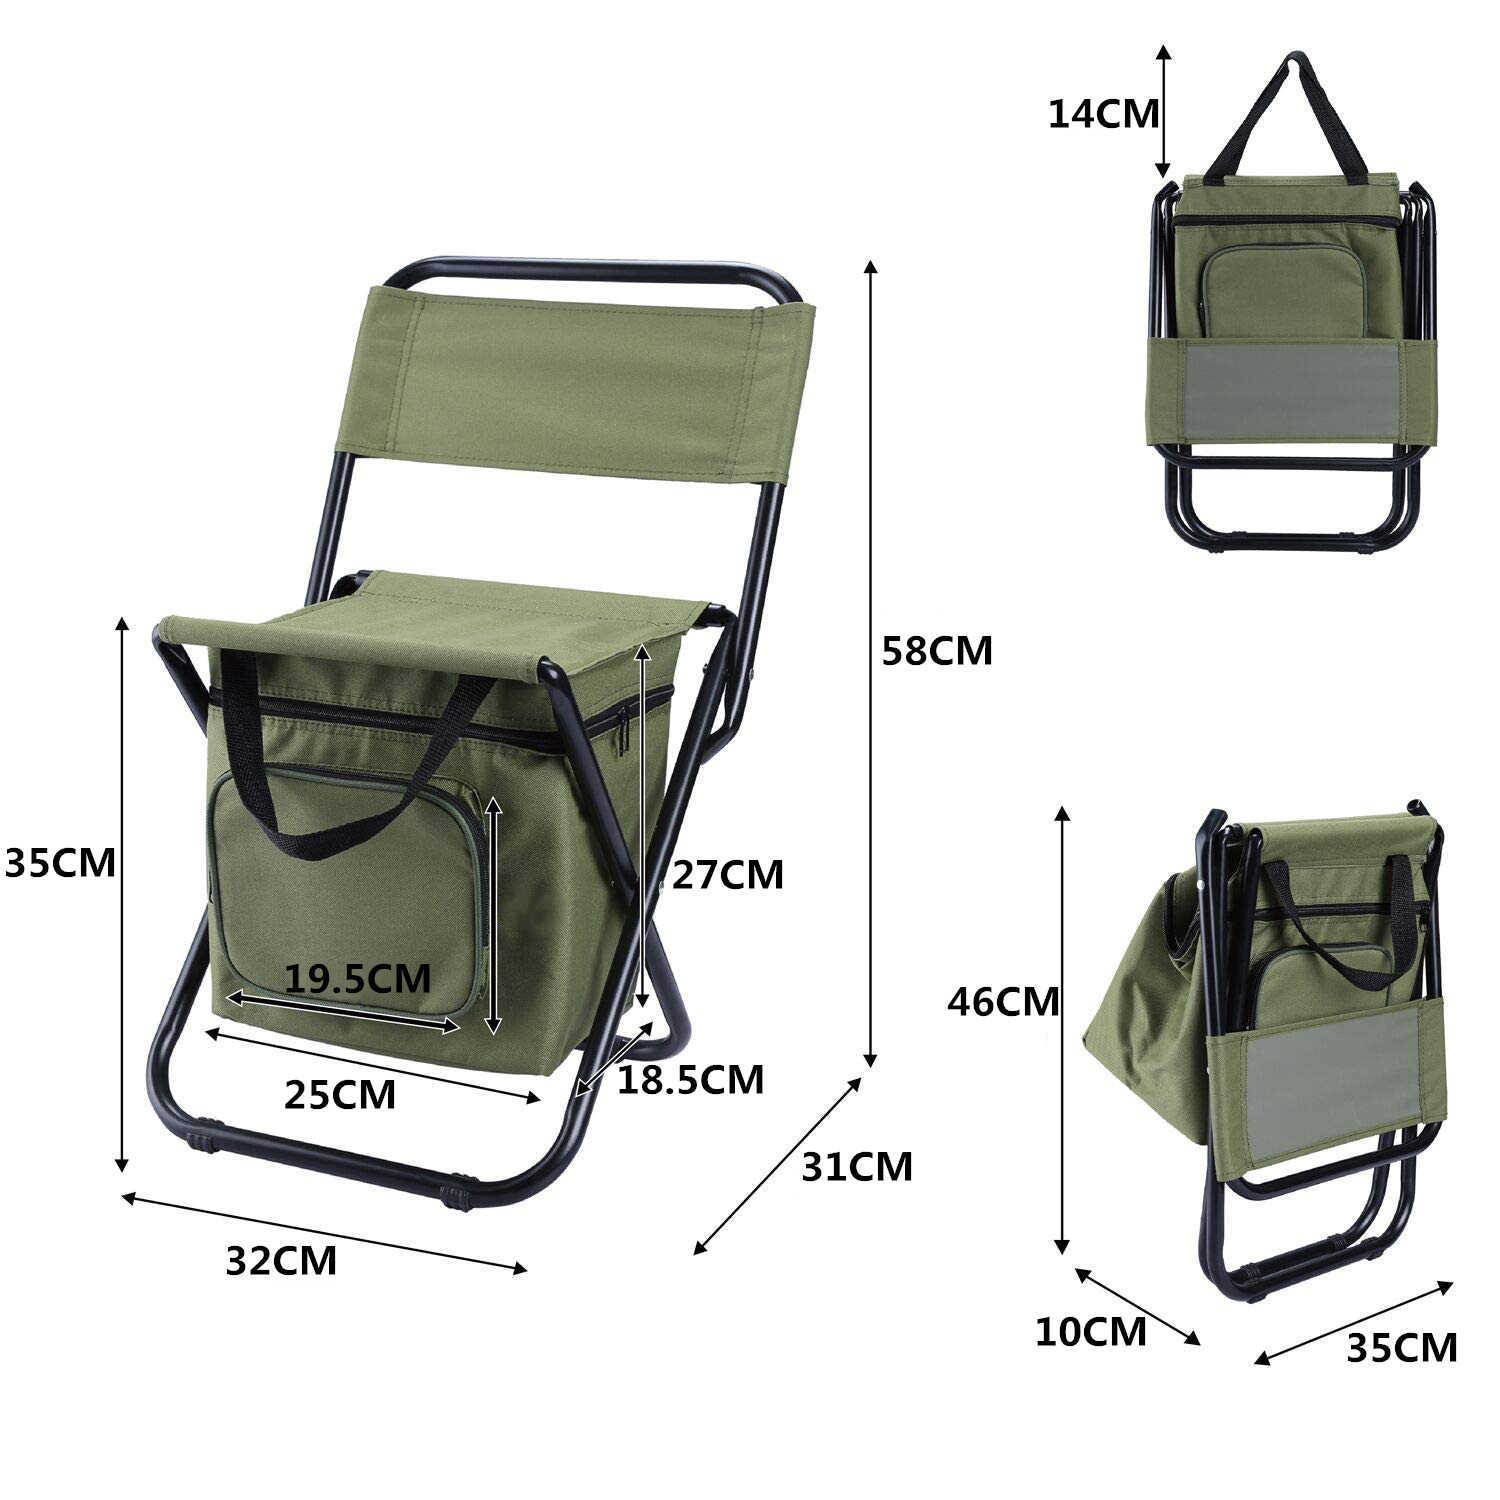 Camp Furniture Multifunctional Folding Chair Outdoor Camping Portable Backrest Ice Pack Chair Barbecue Heat Preservation Bag Fishing Stools HKD230909